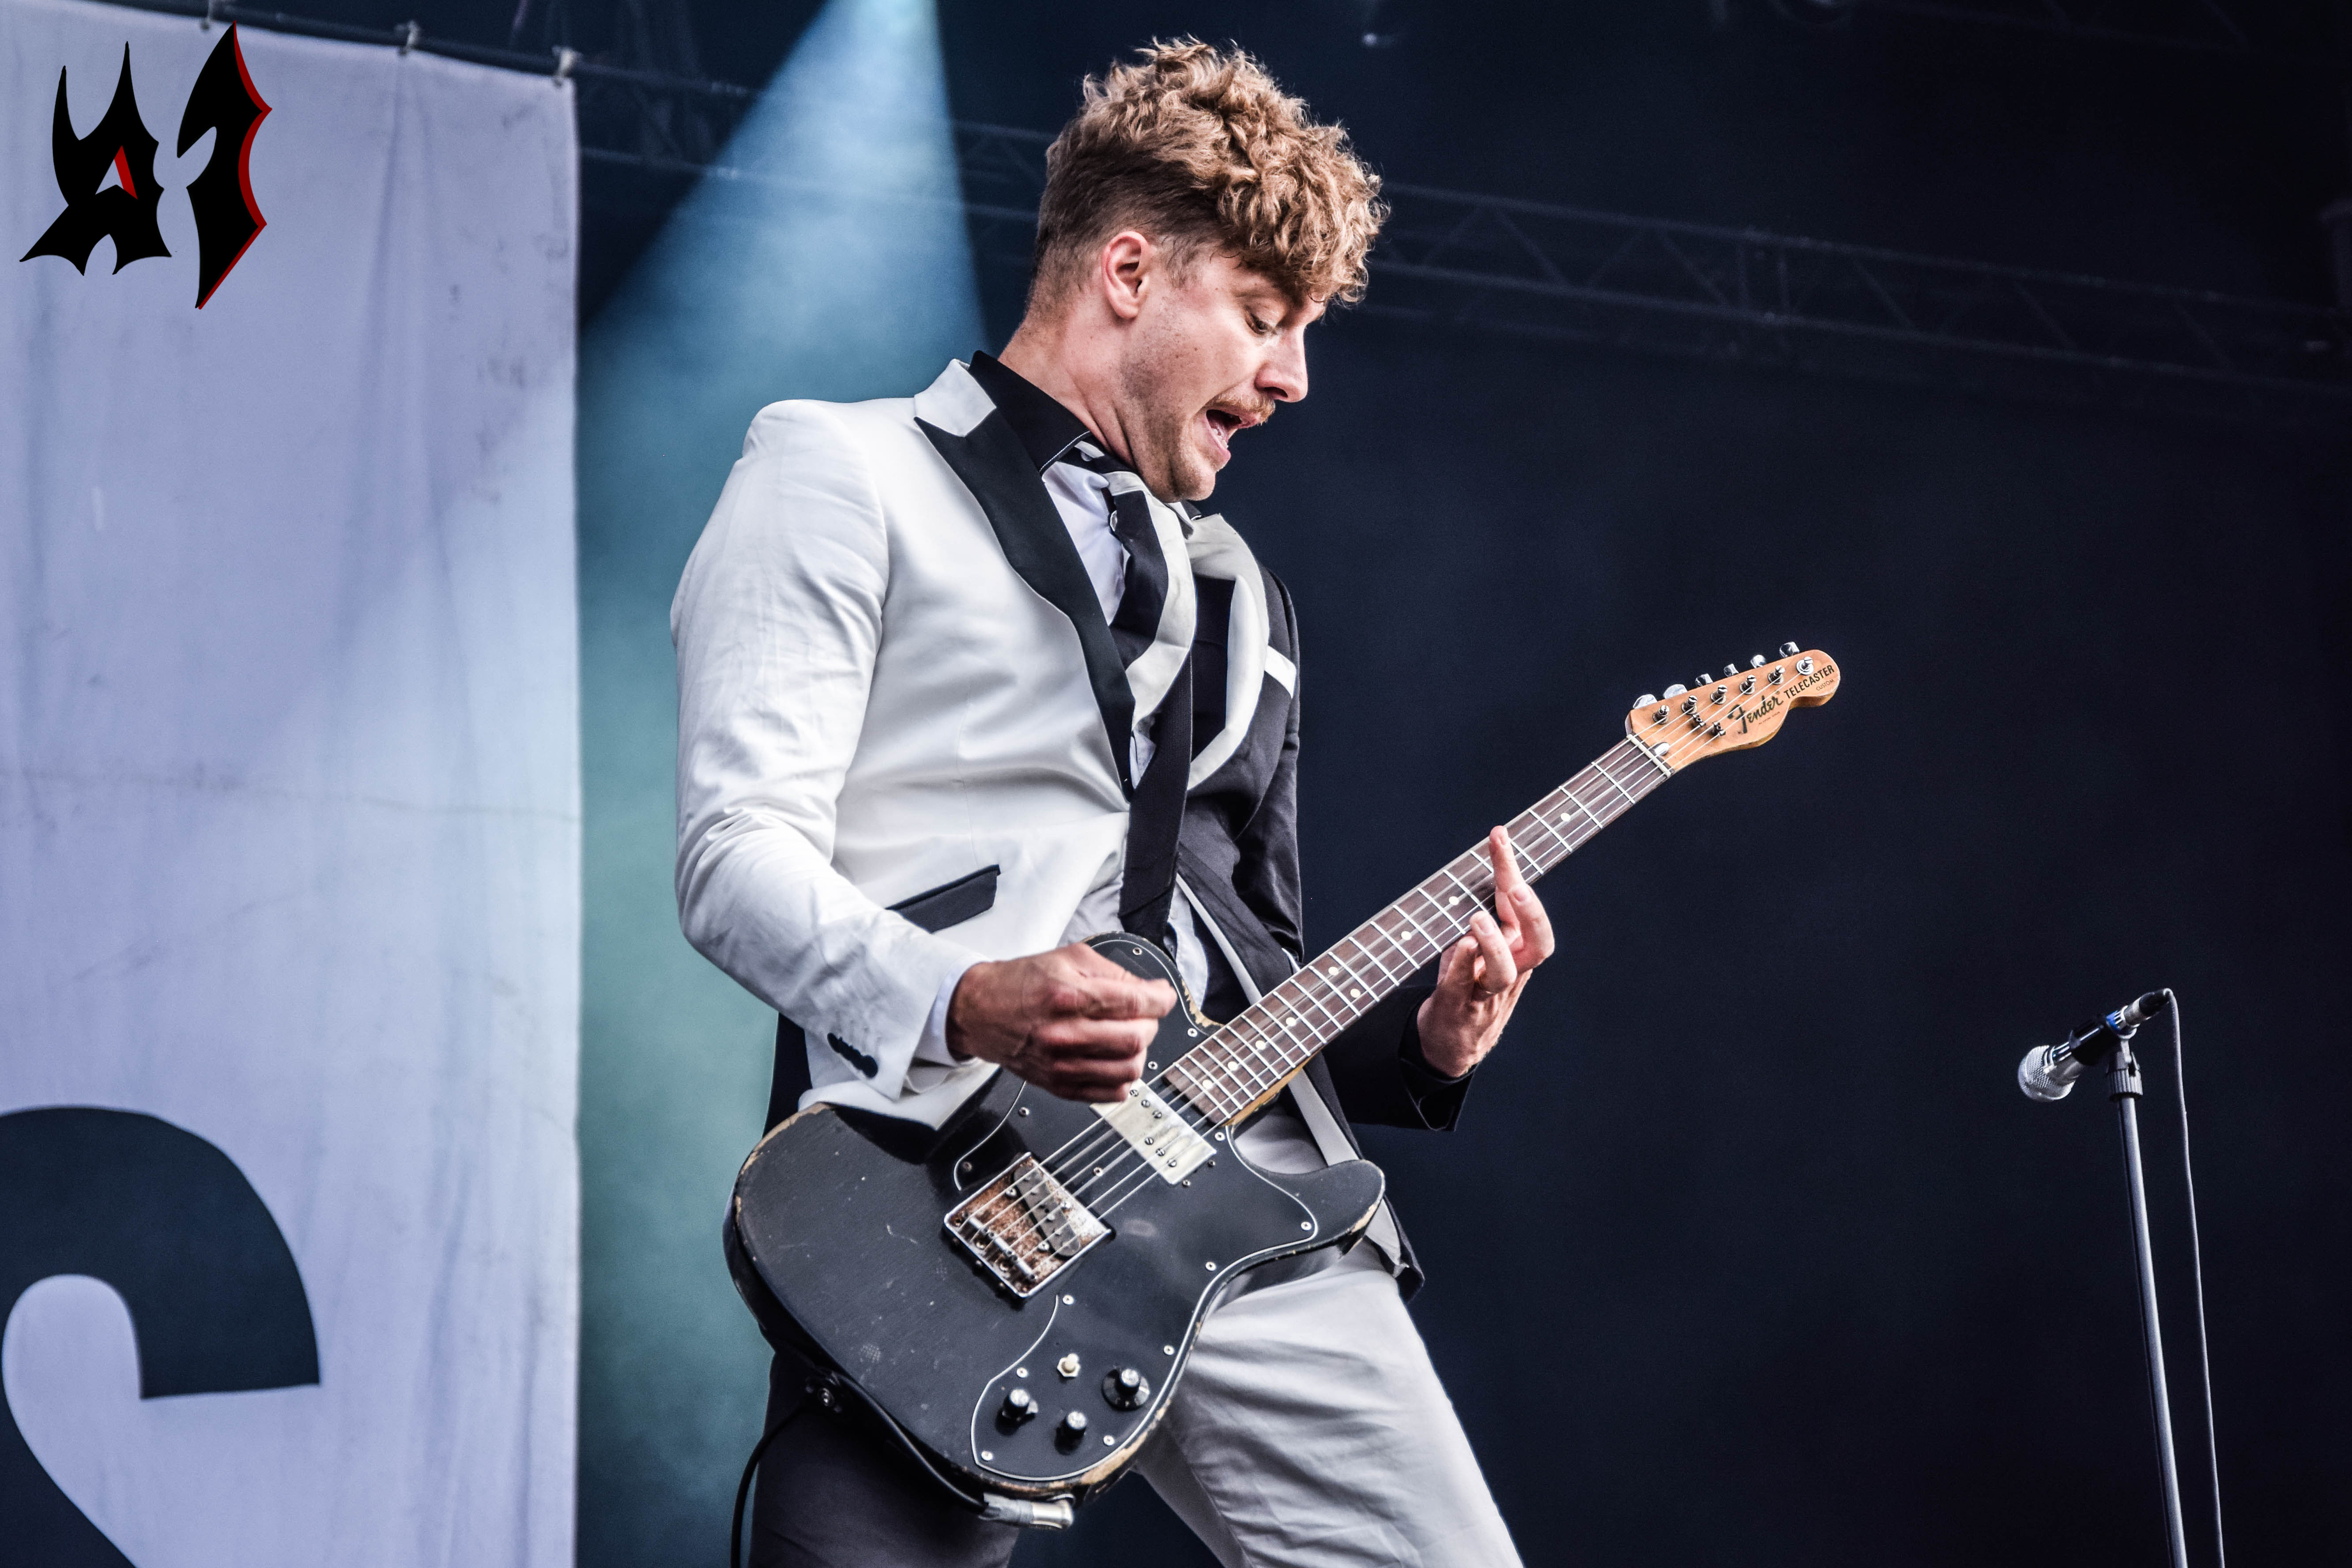 Donwload 2018 – Day 3 - The Hives 28